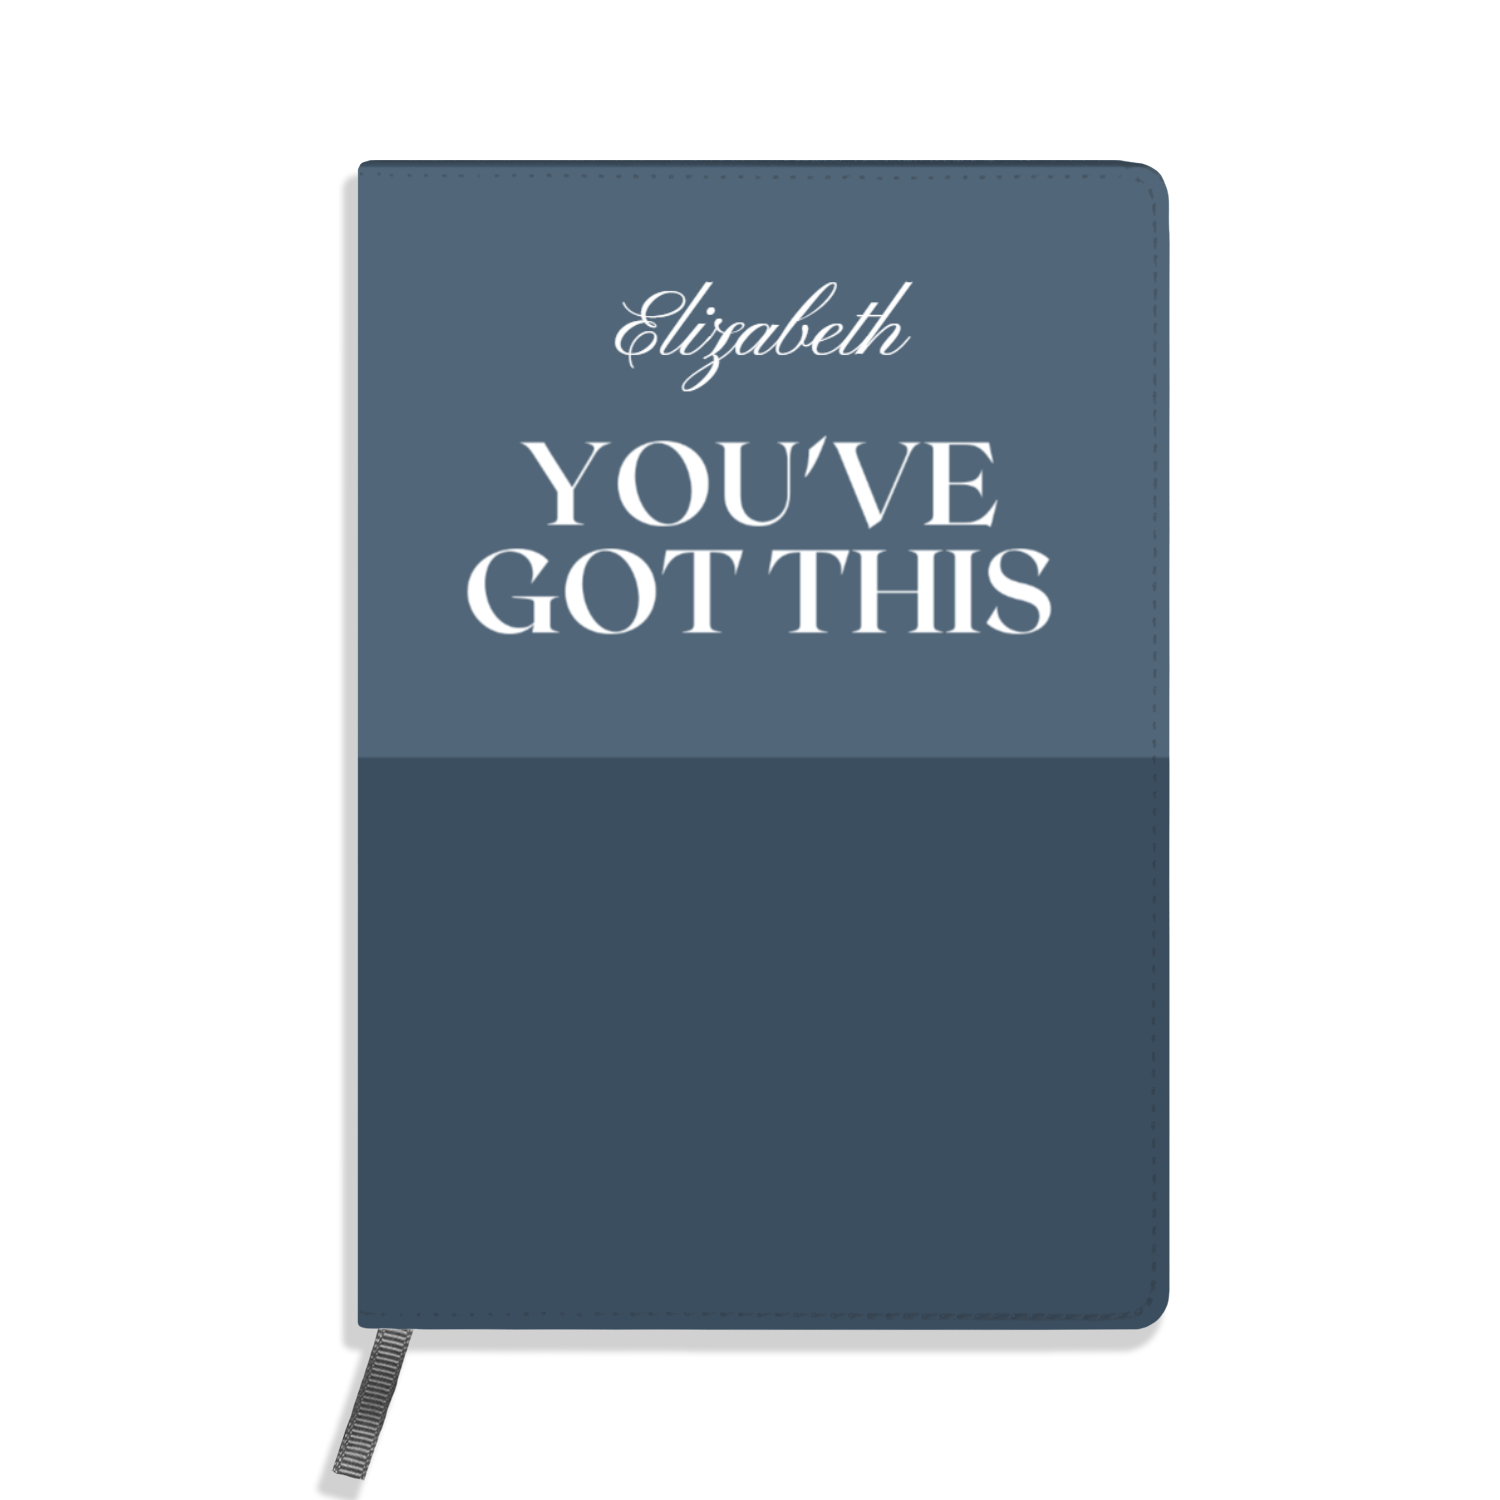 Personalized Notebook/Journals - Personalized Journal - You've Got This 